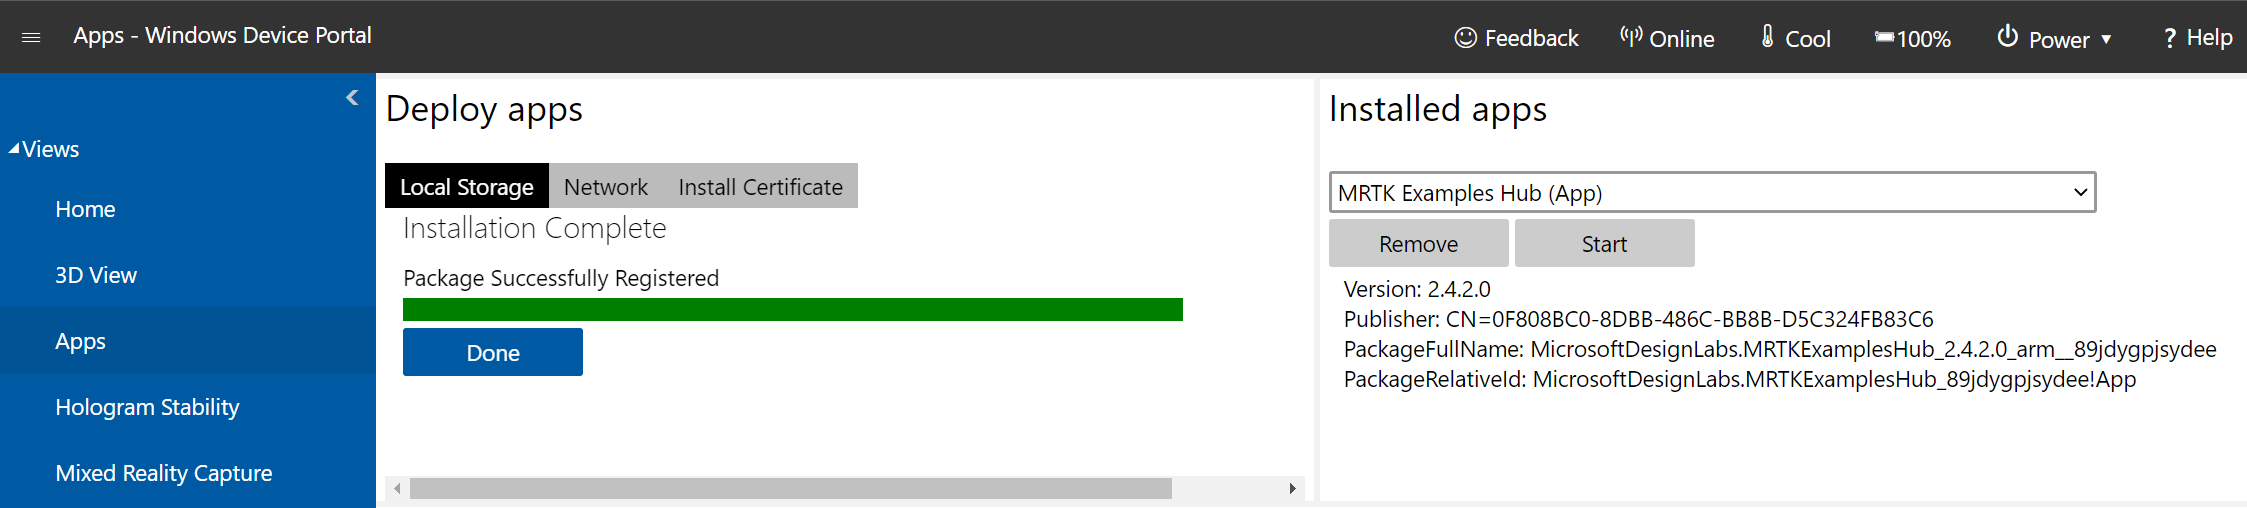 Screenshot of the Apss manager page open in the Windows Device Portal with installation successfully completed